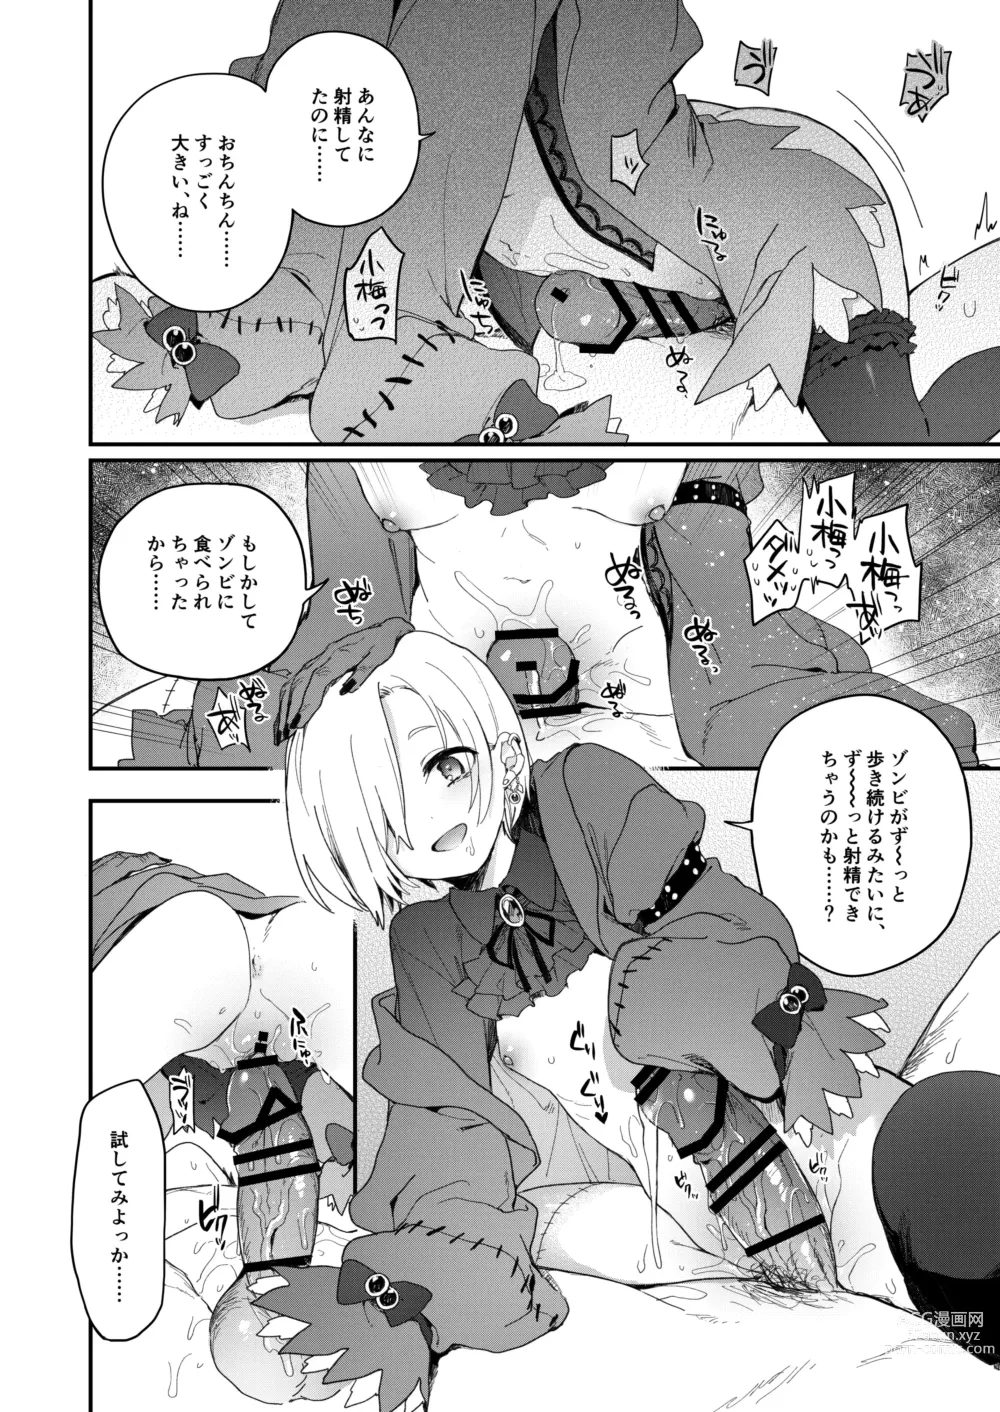 Page 33 of doujinshi Harem Halloween Party